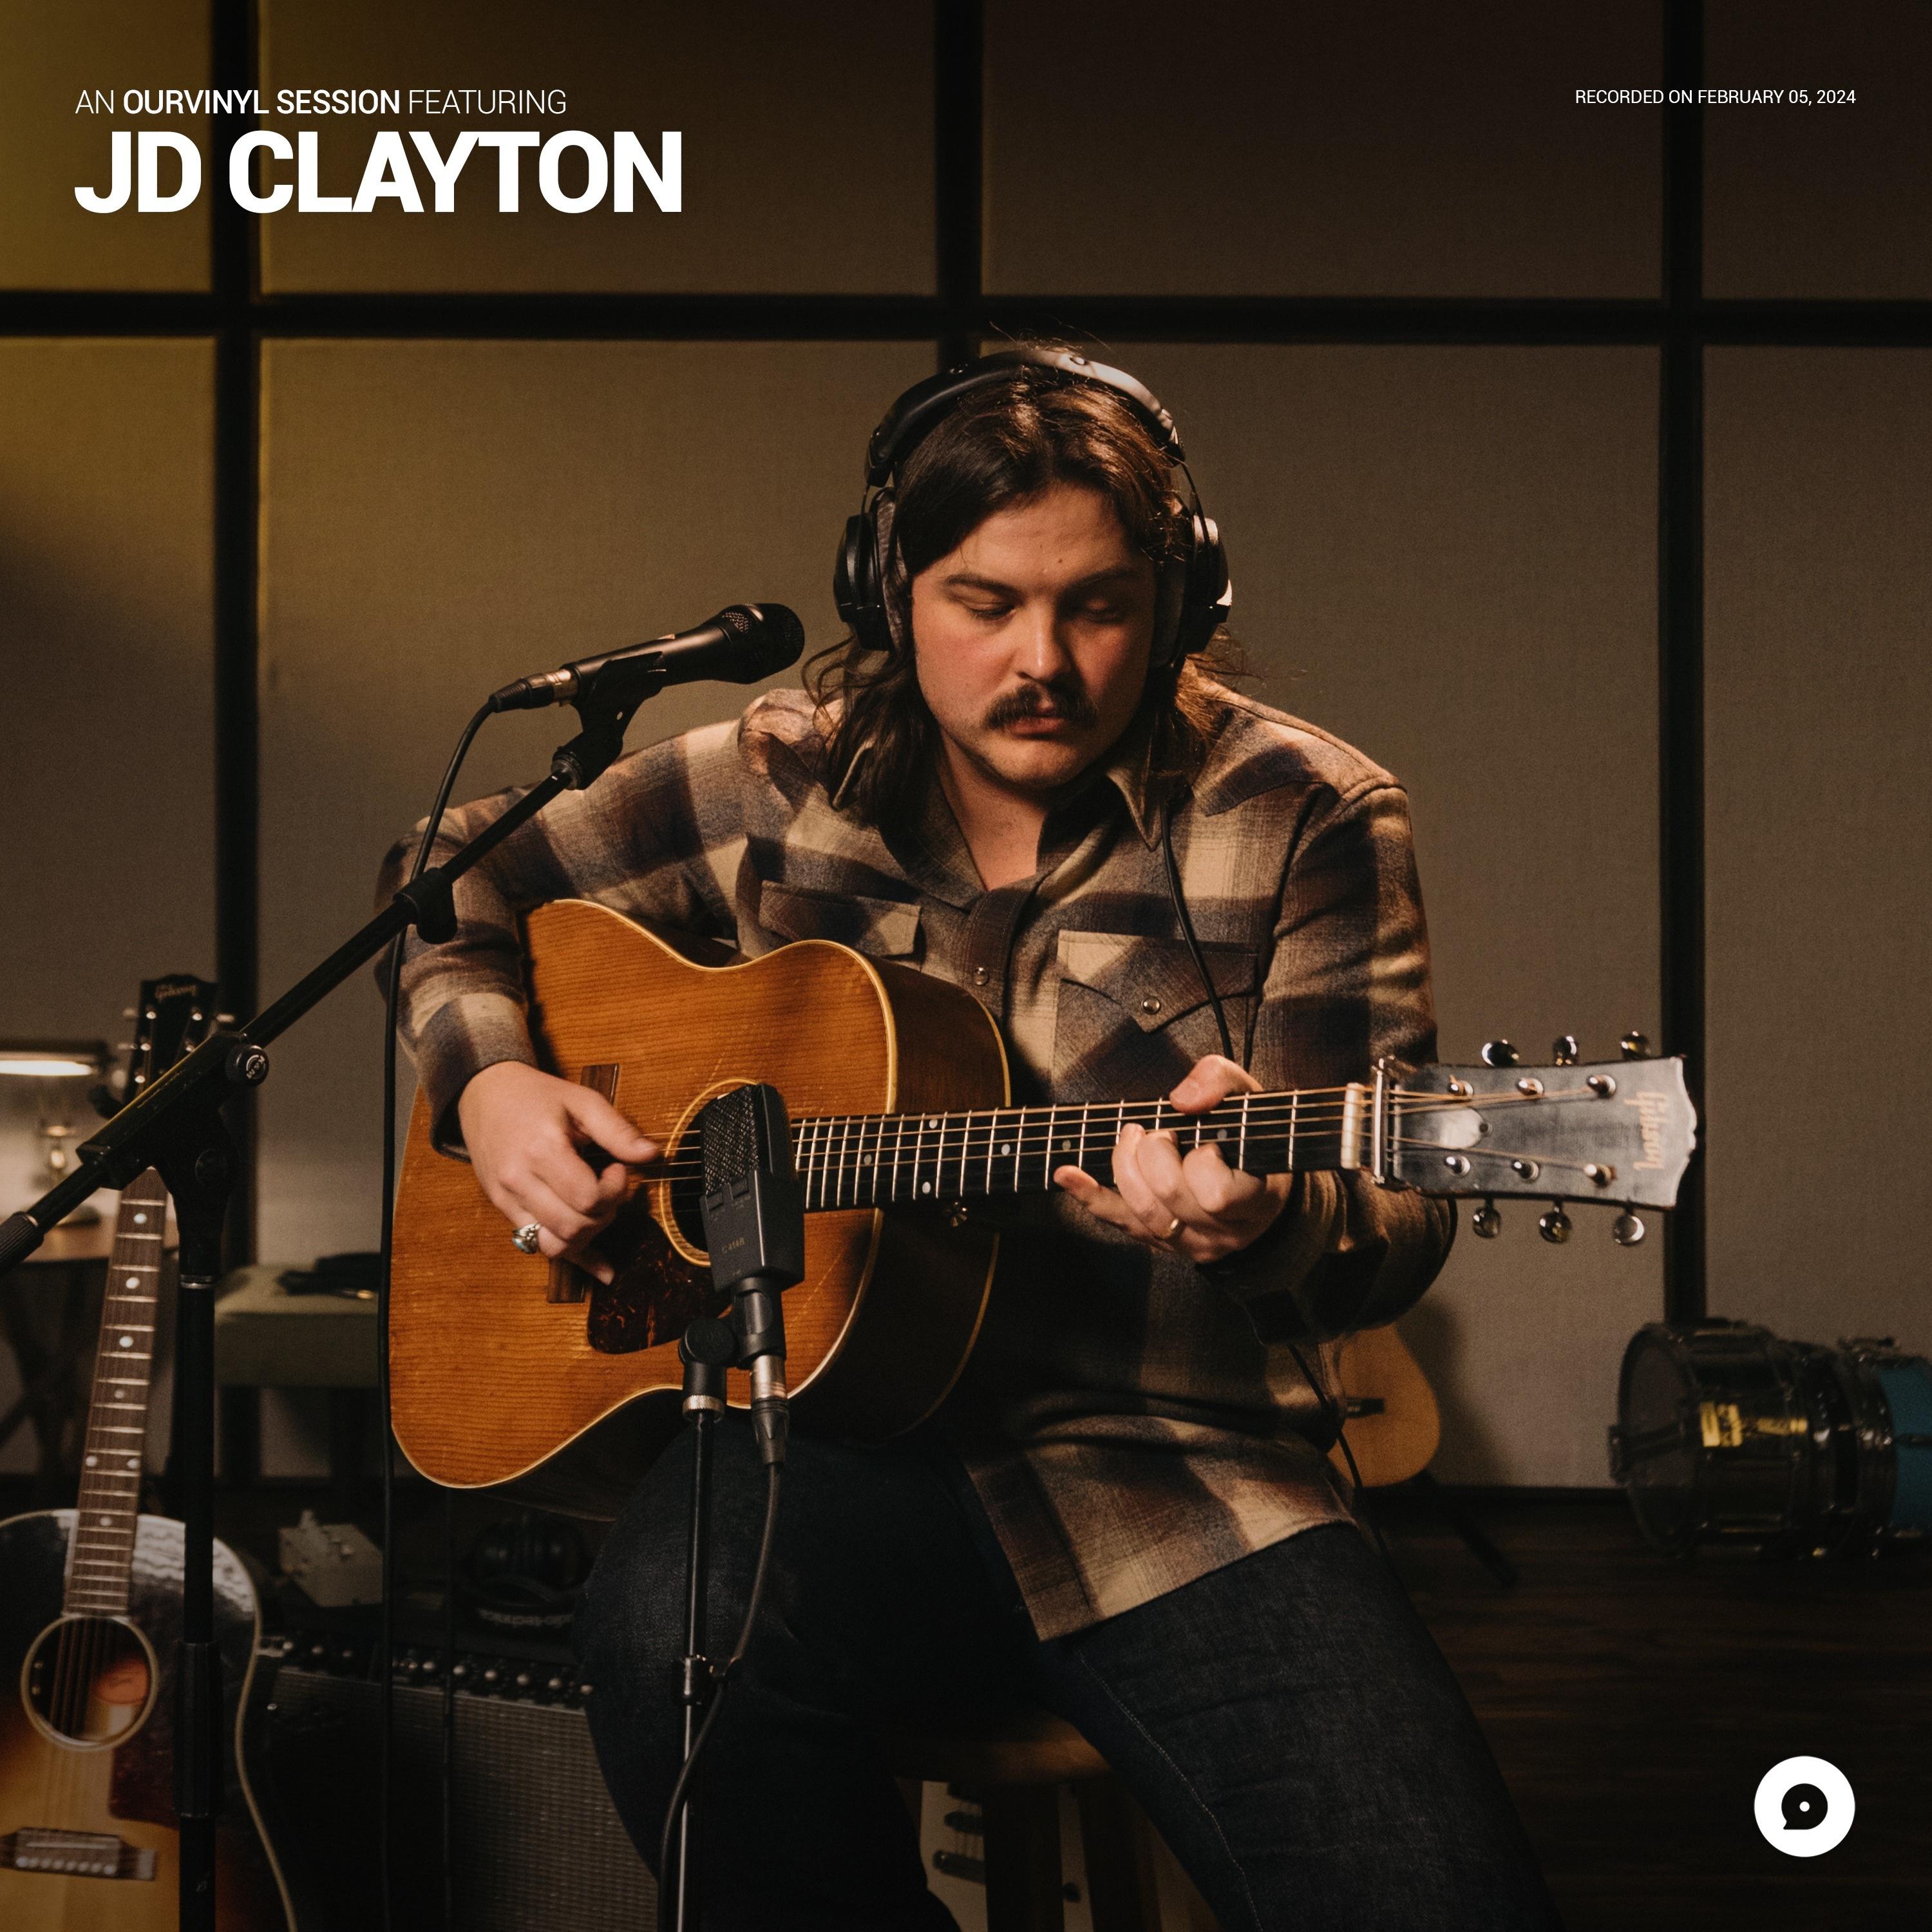 JD Clayton - High Hopes and Low Expectations (OurVinyl Sessions)